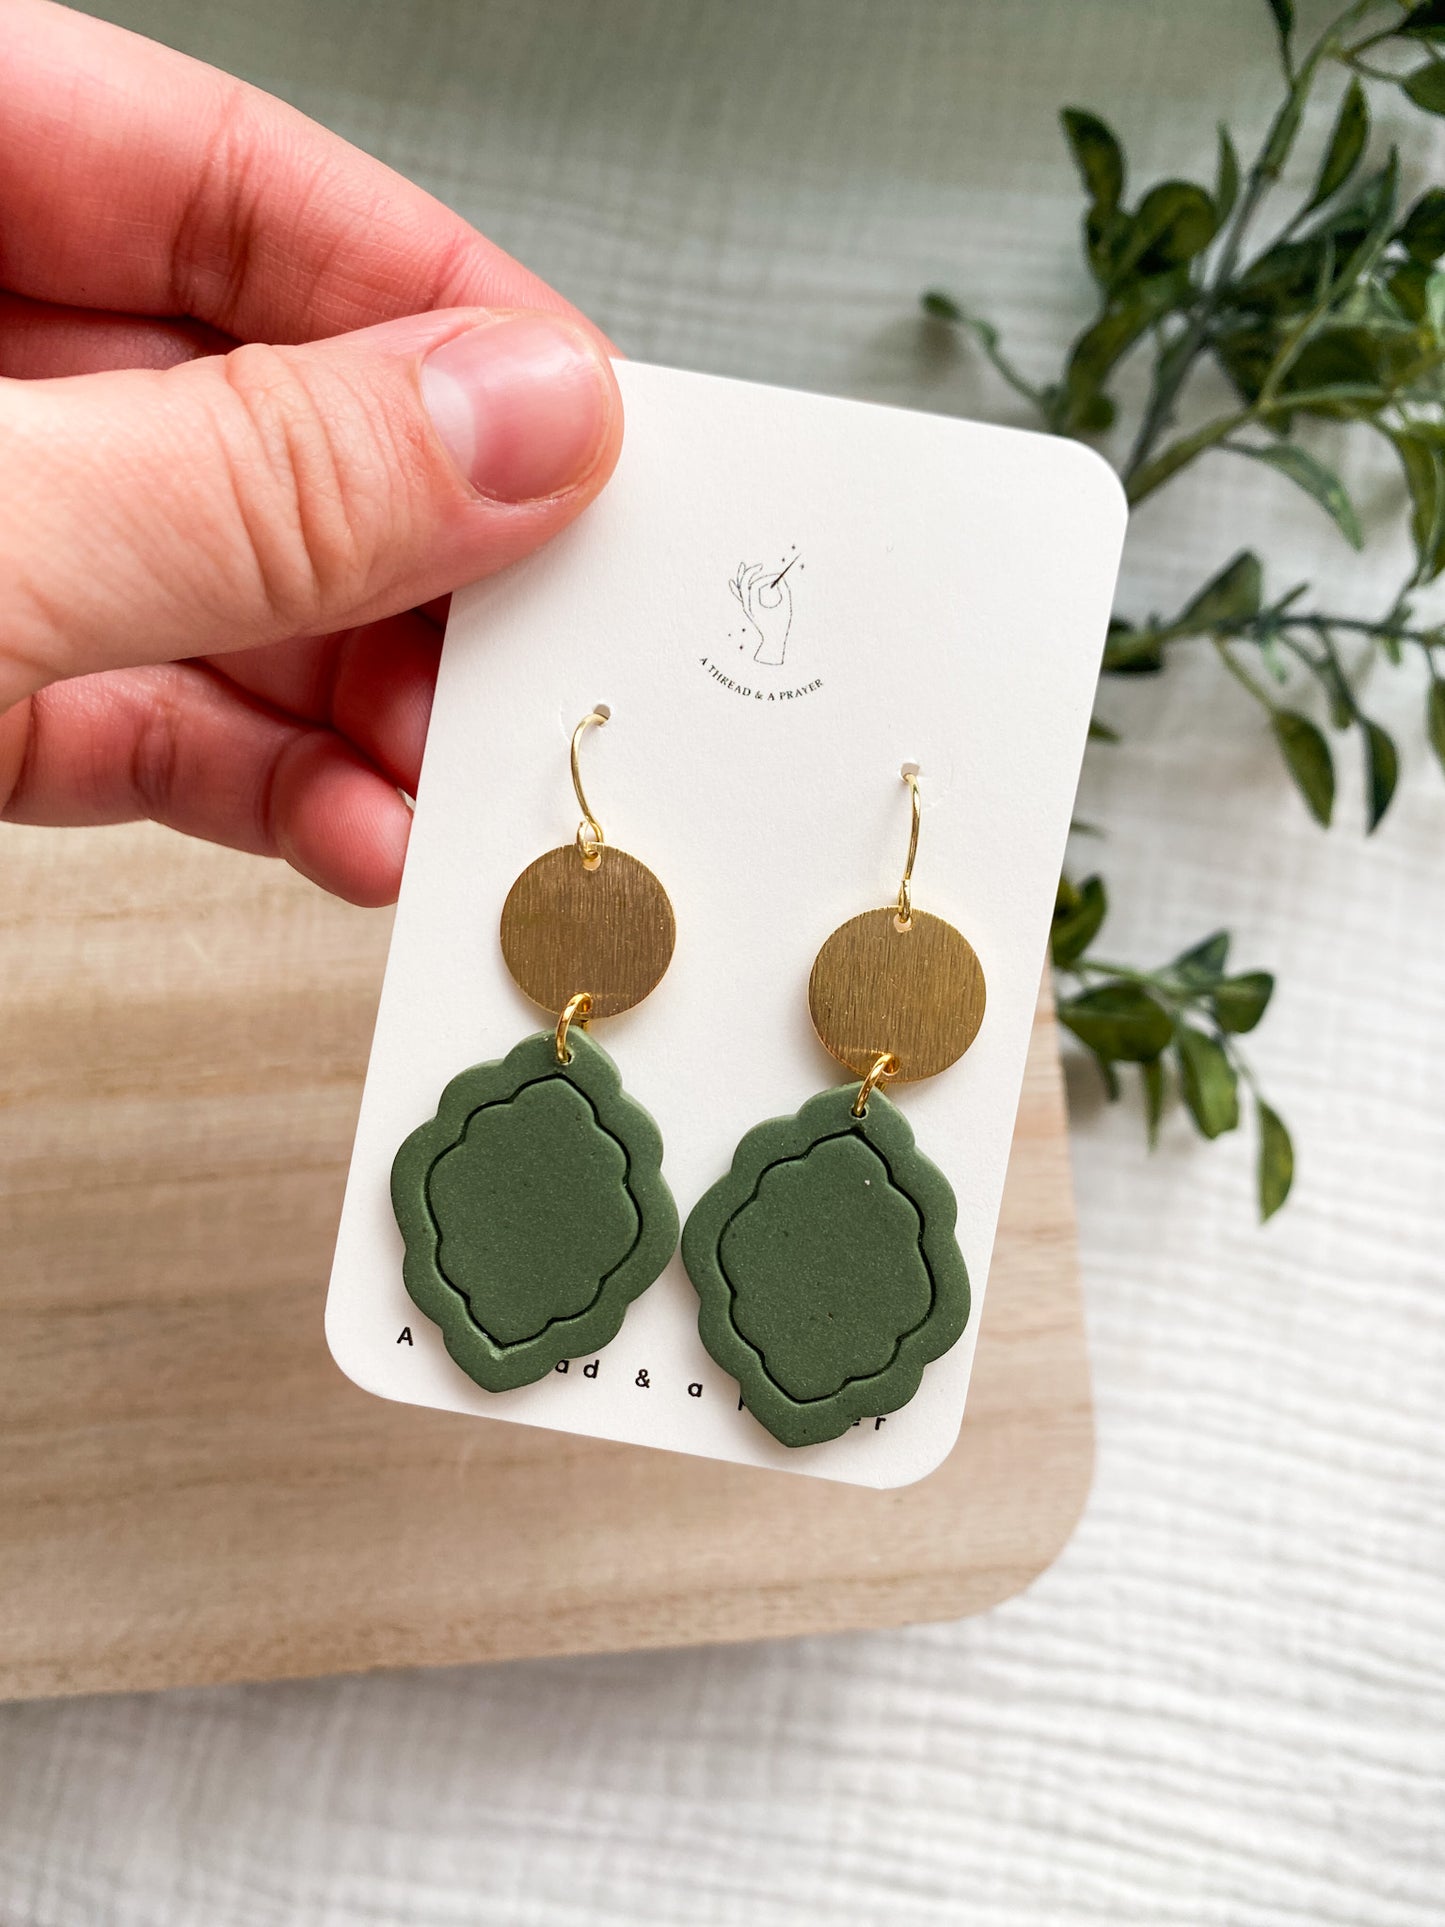 Spring Style Green Clay an Brass Earrings | Olive Green | Polymer Clay and Brass Accent | Lightweight Earrings